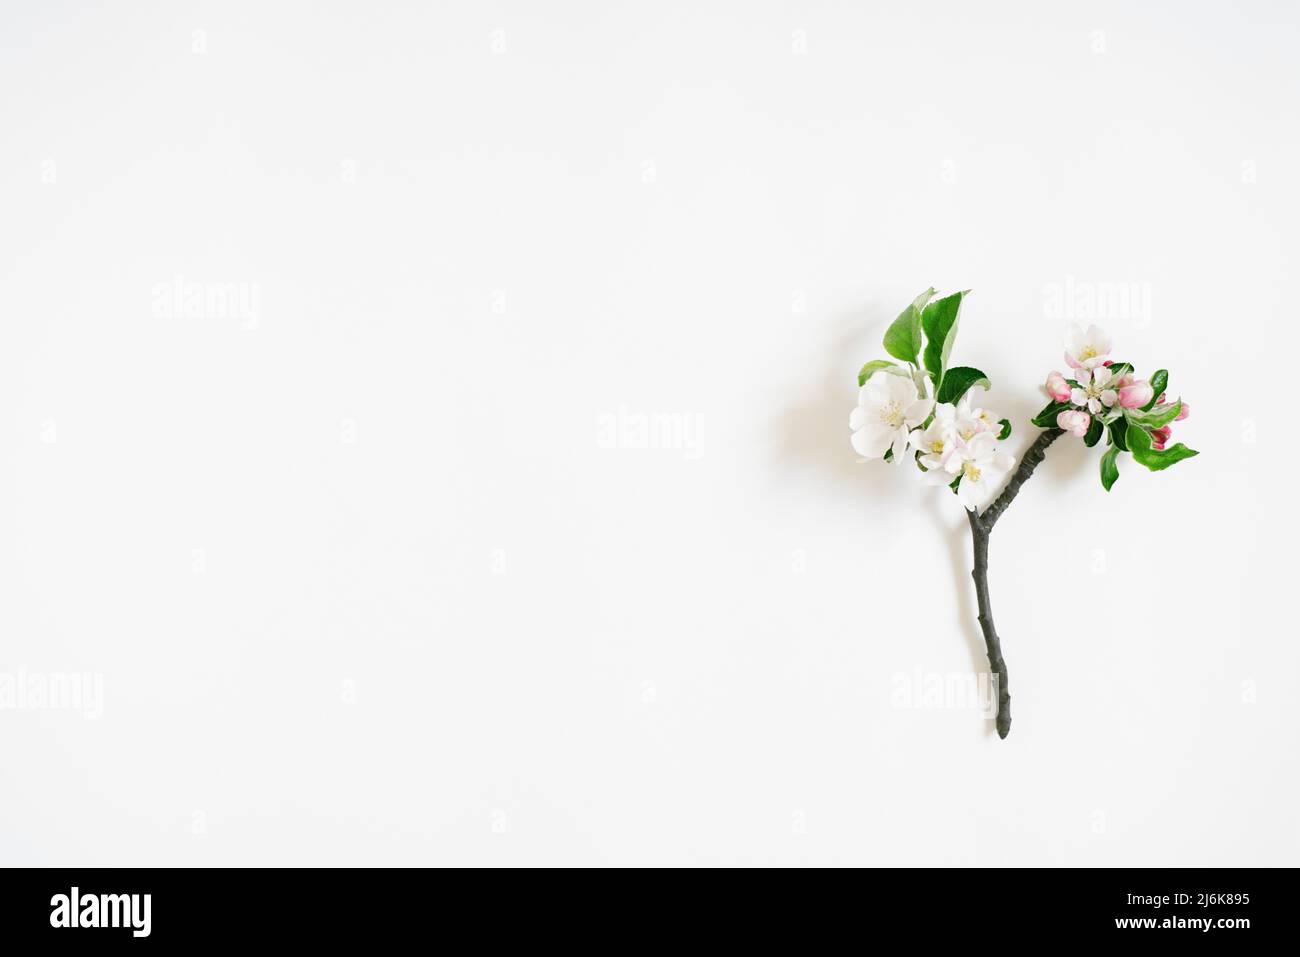 Small sprig of apple tree with white flowers on a white background with copy space. Creative greeting card. Flat lay, top view Stock Photo